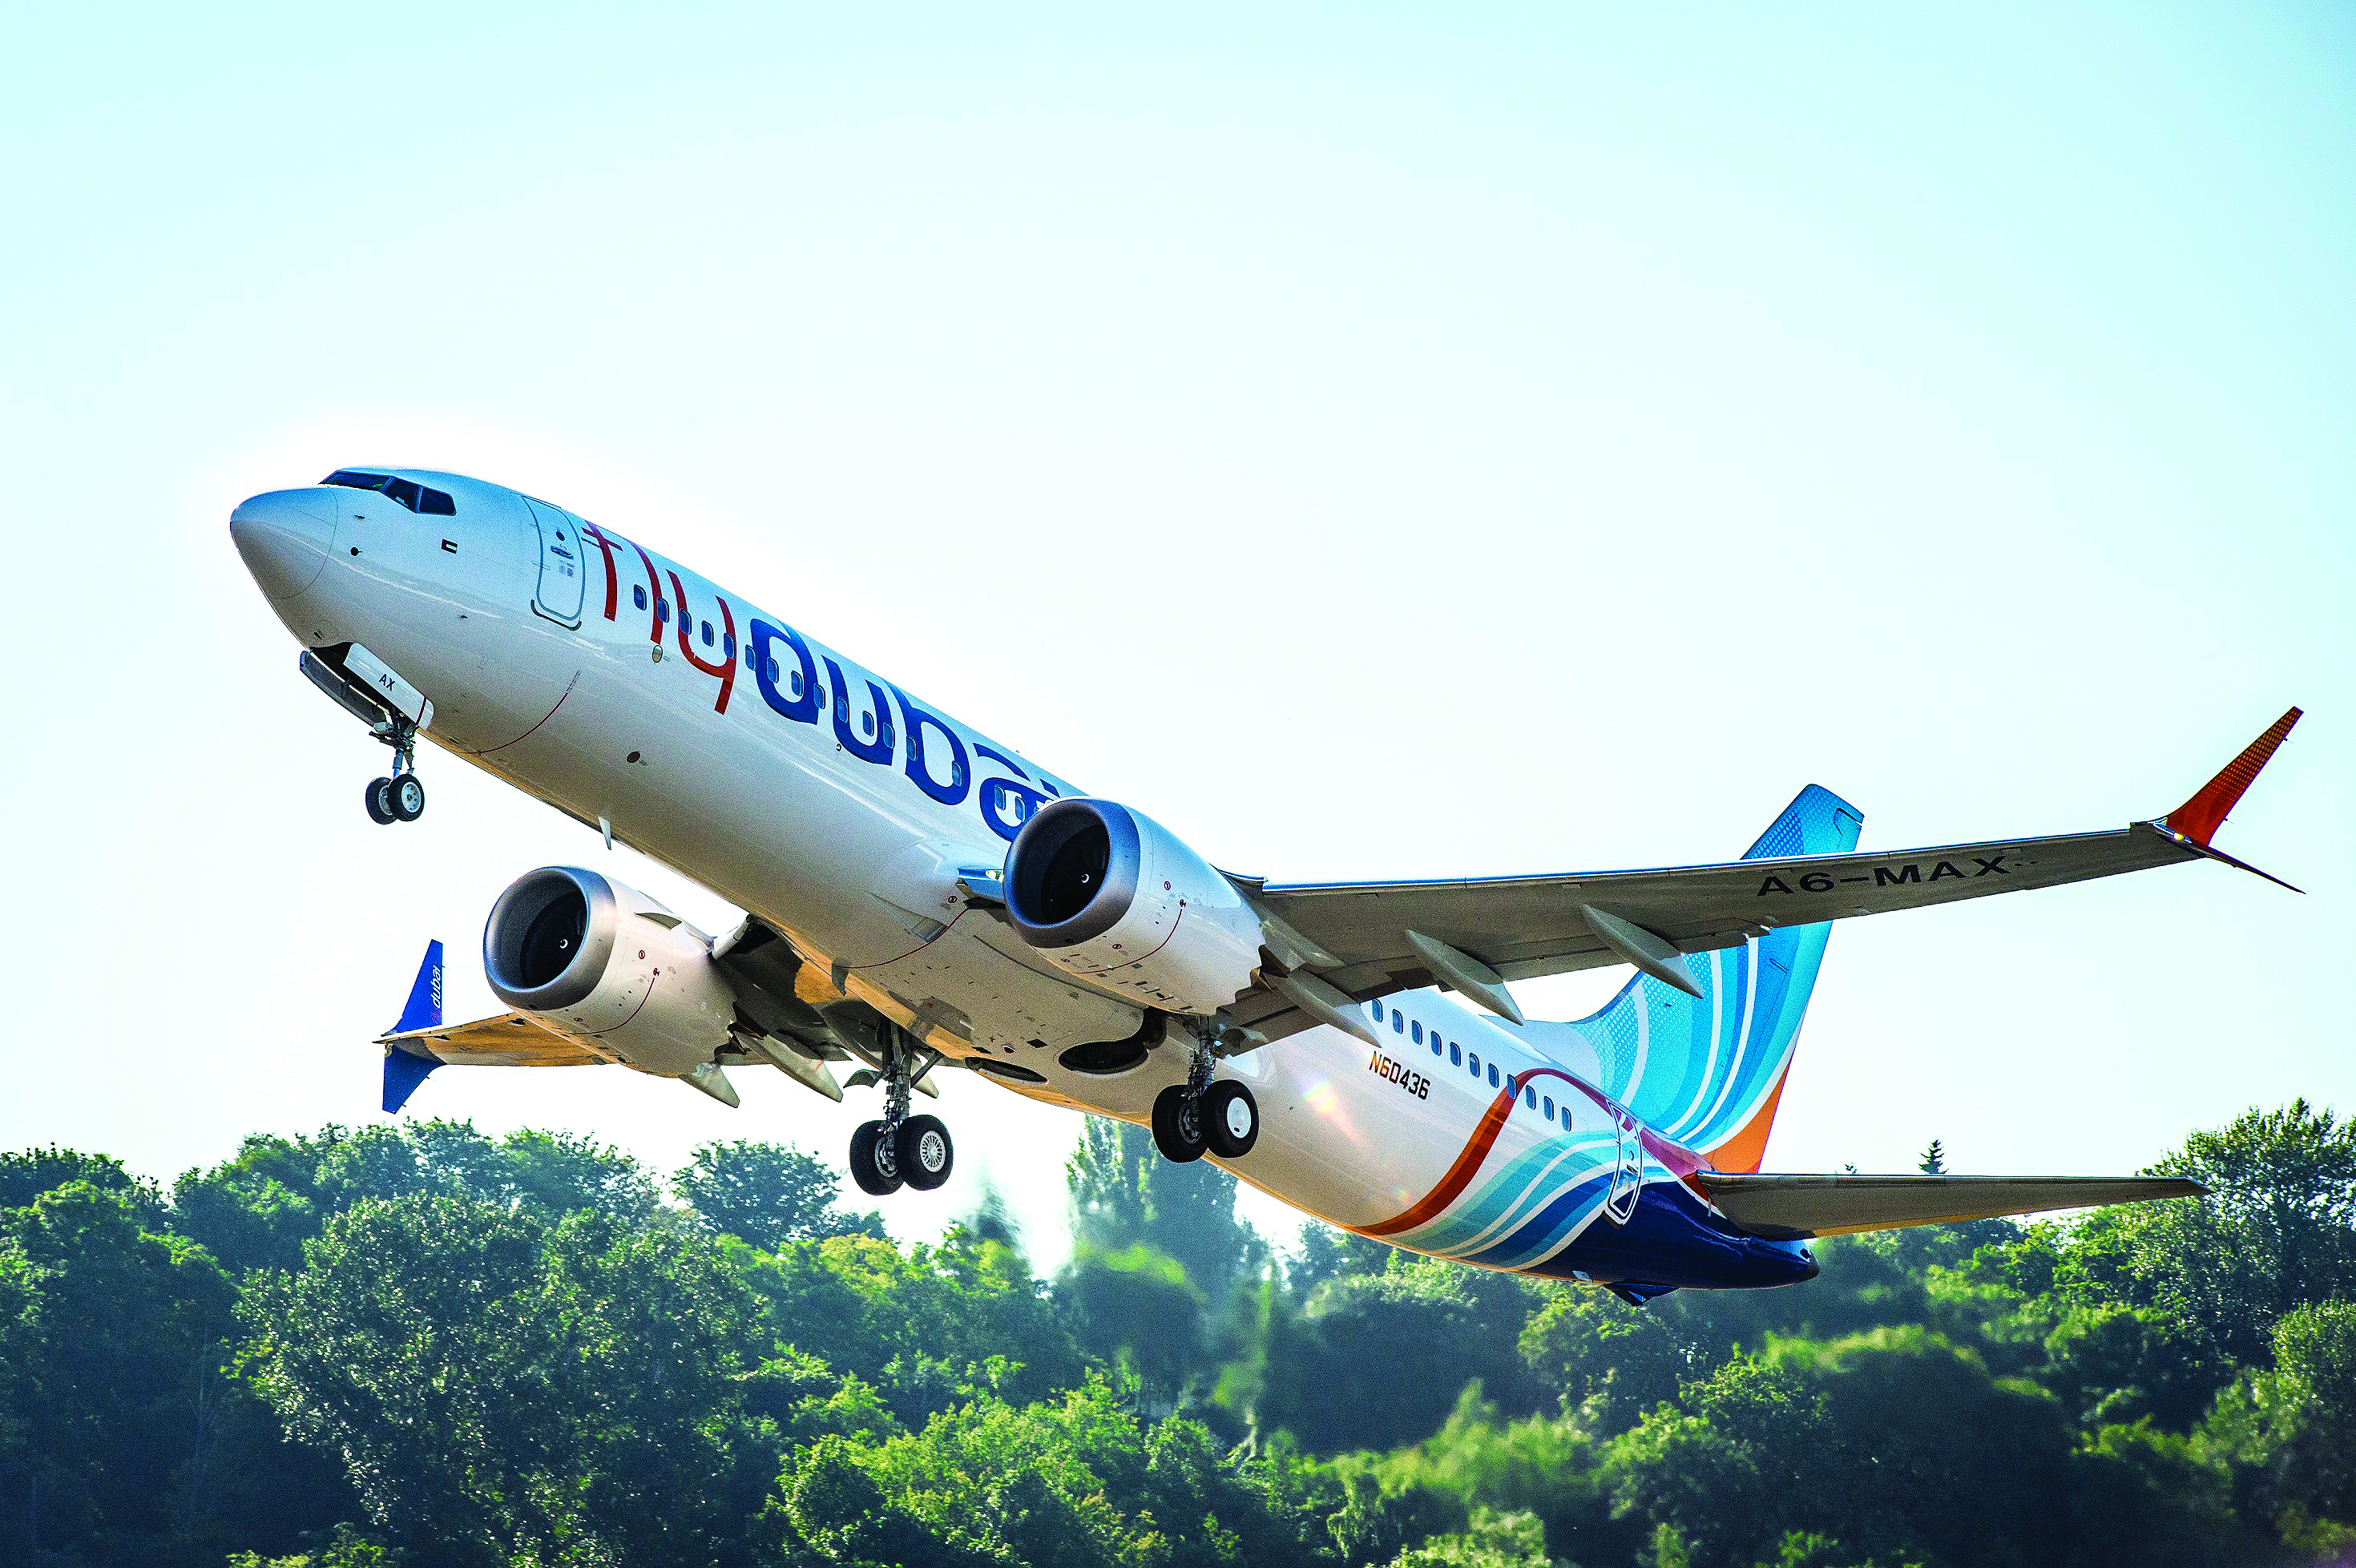 flydubai takes delivery of first Boeing 737 MAX 8